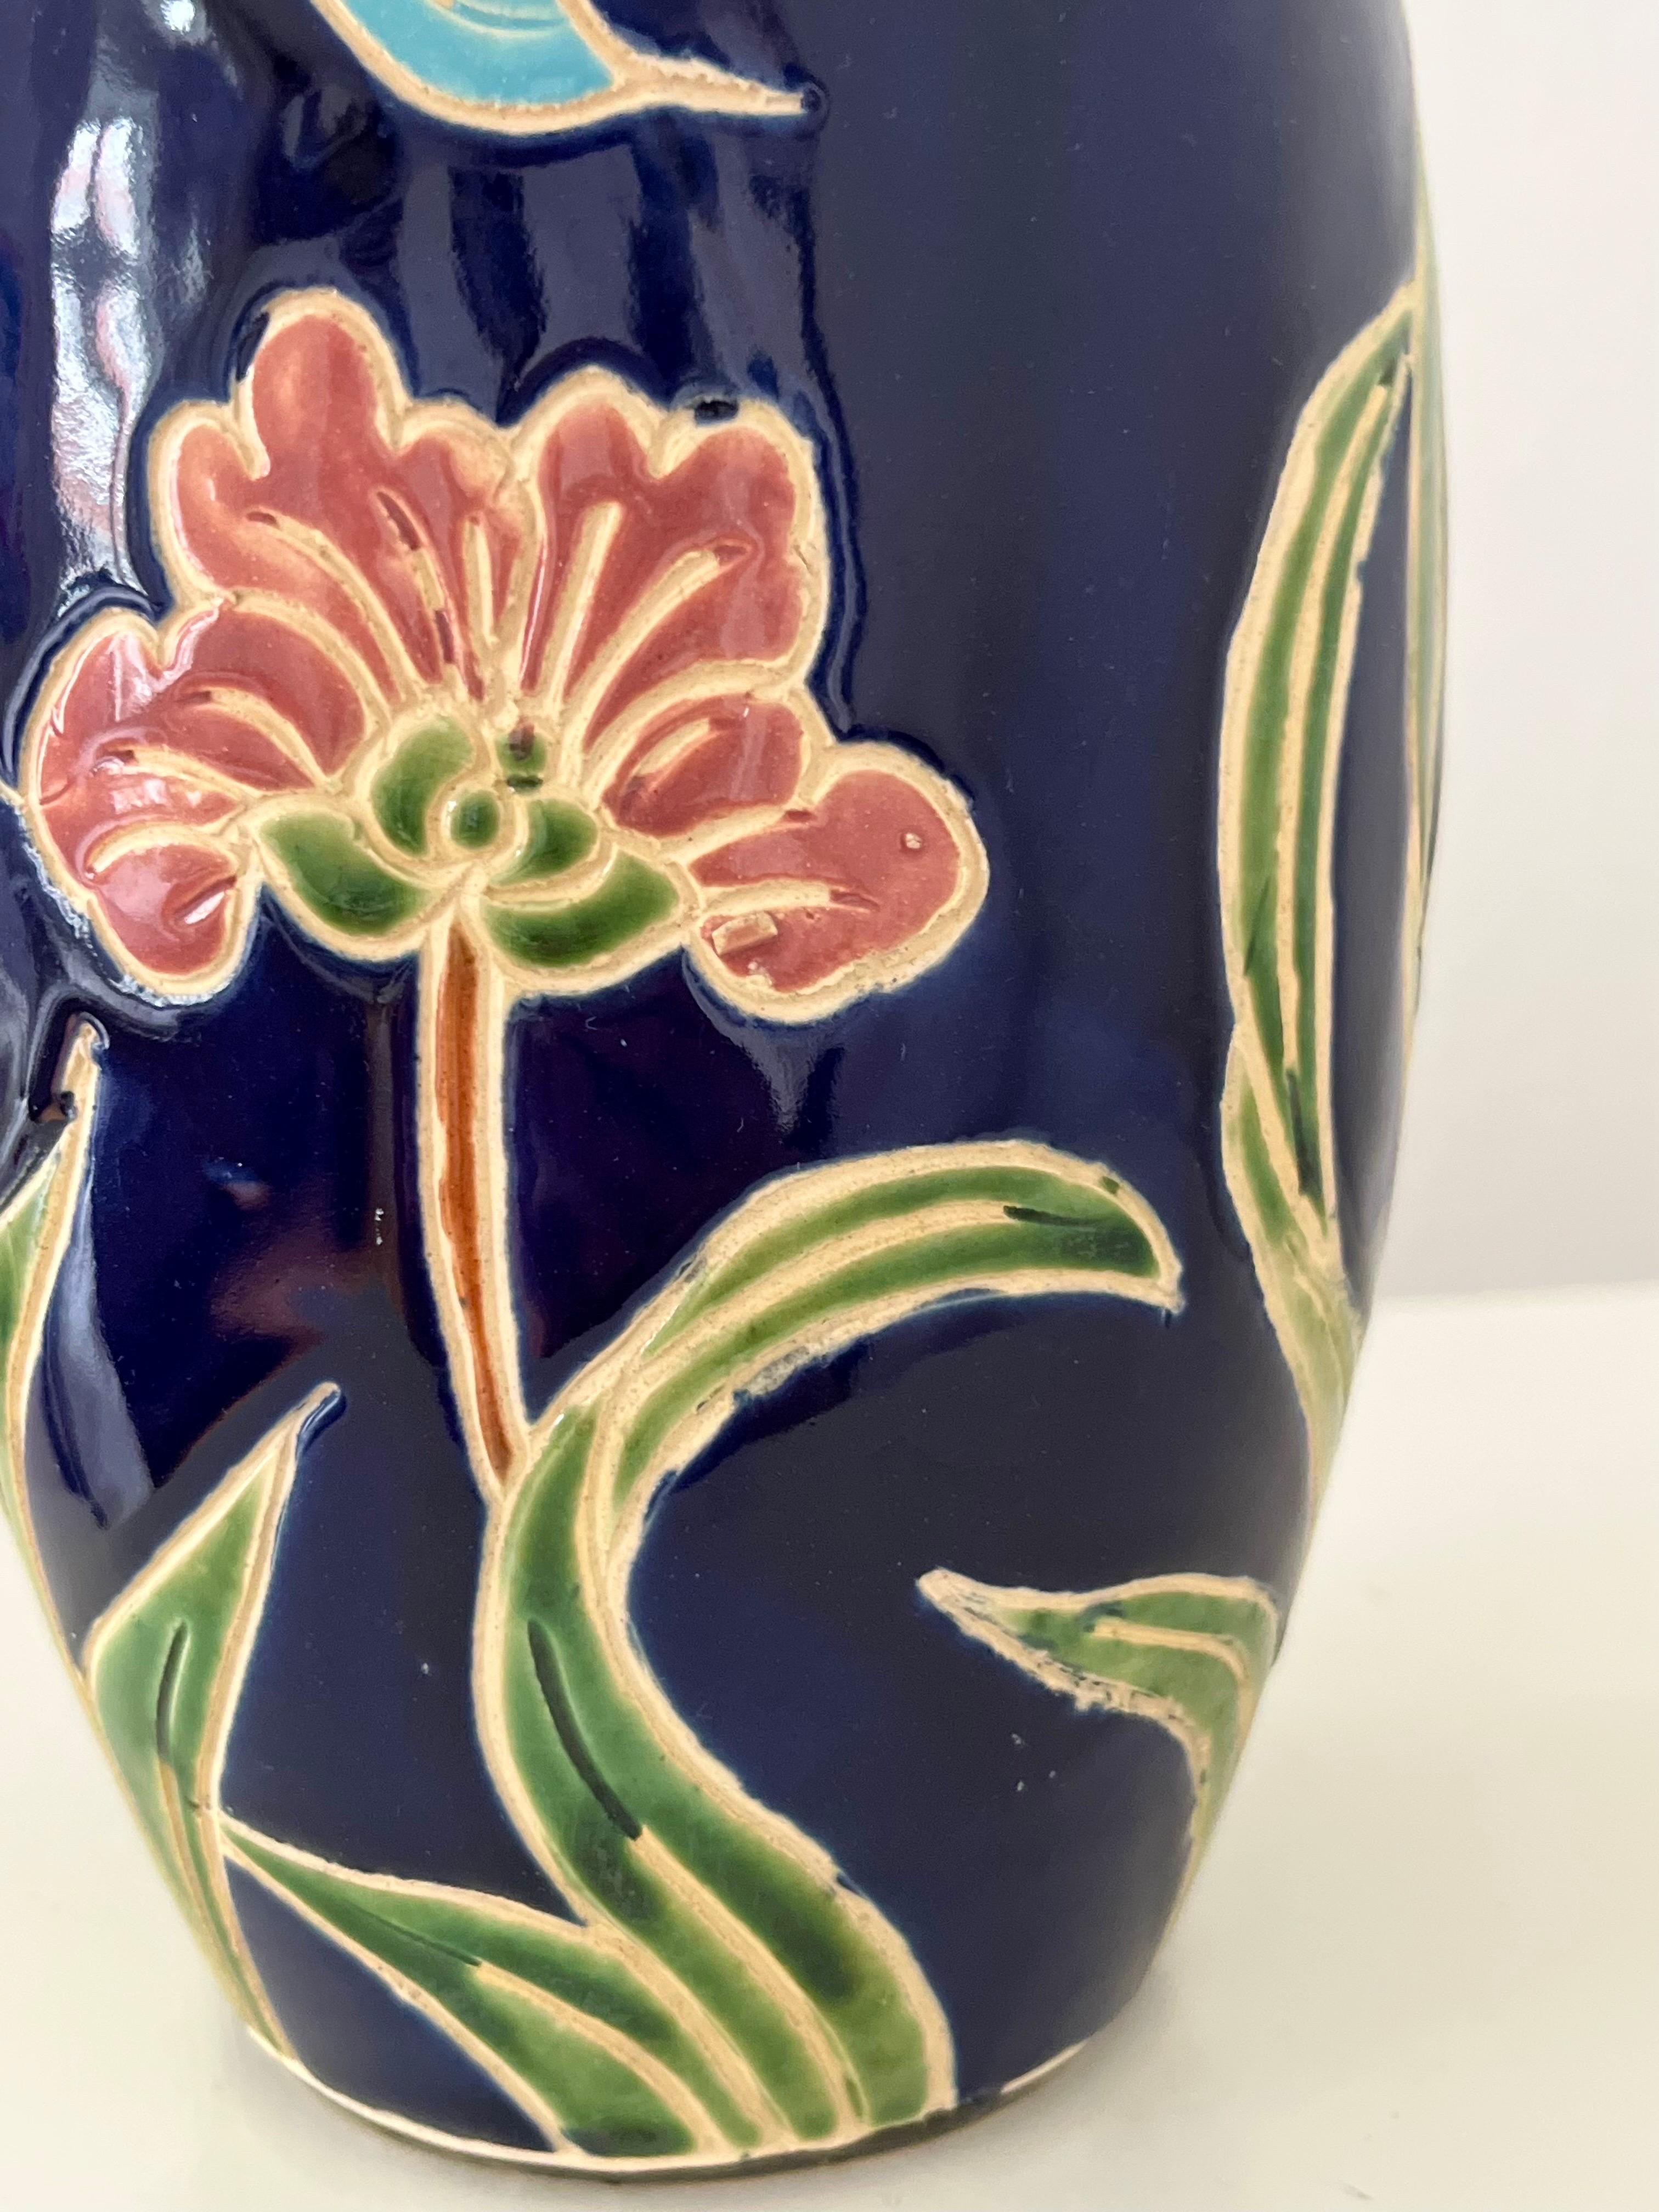 1960s/1970s Scandinavian Organic Modern Ceramic Vase with Colorful Floral Motifs For Sale 10